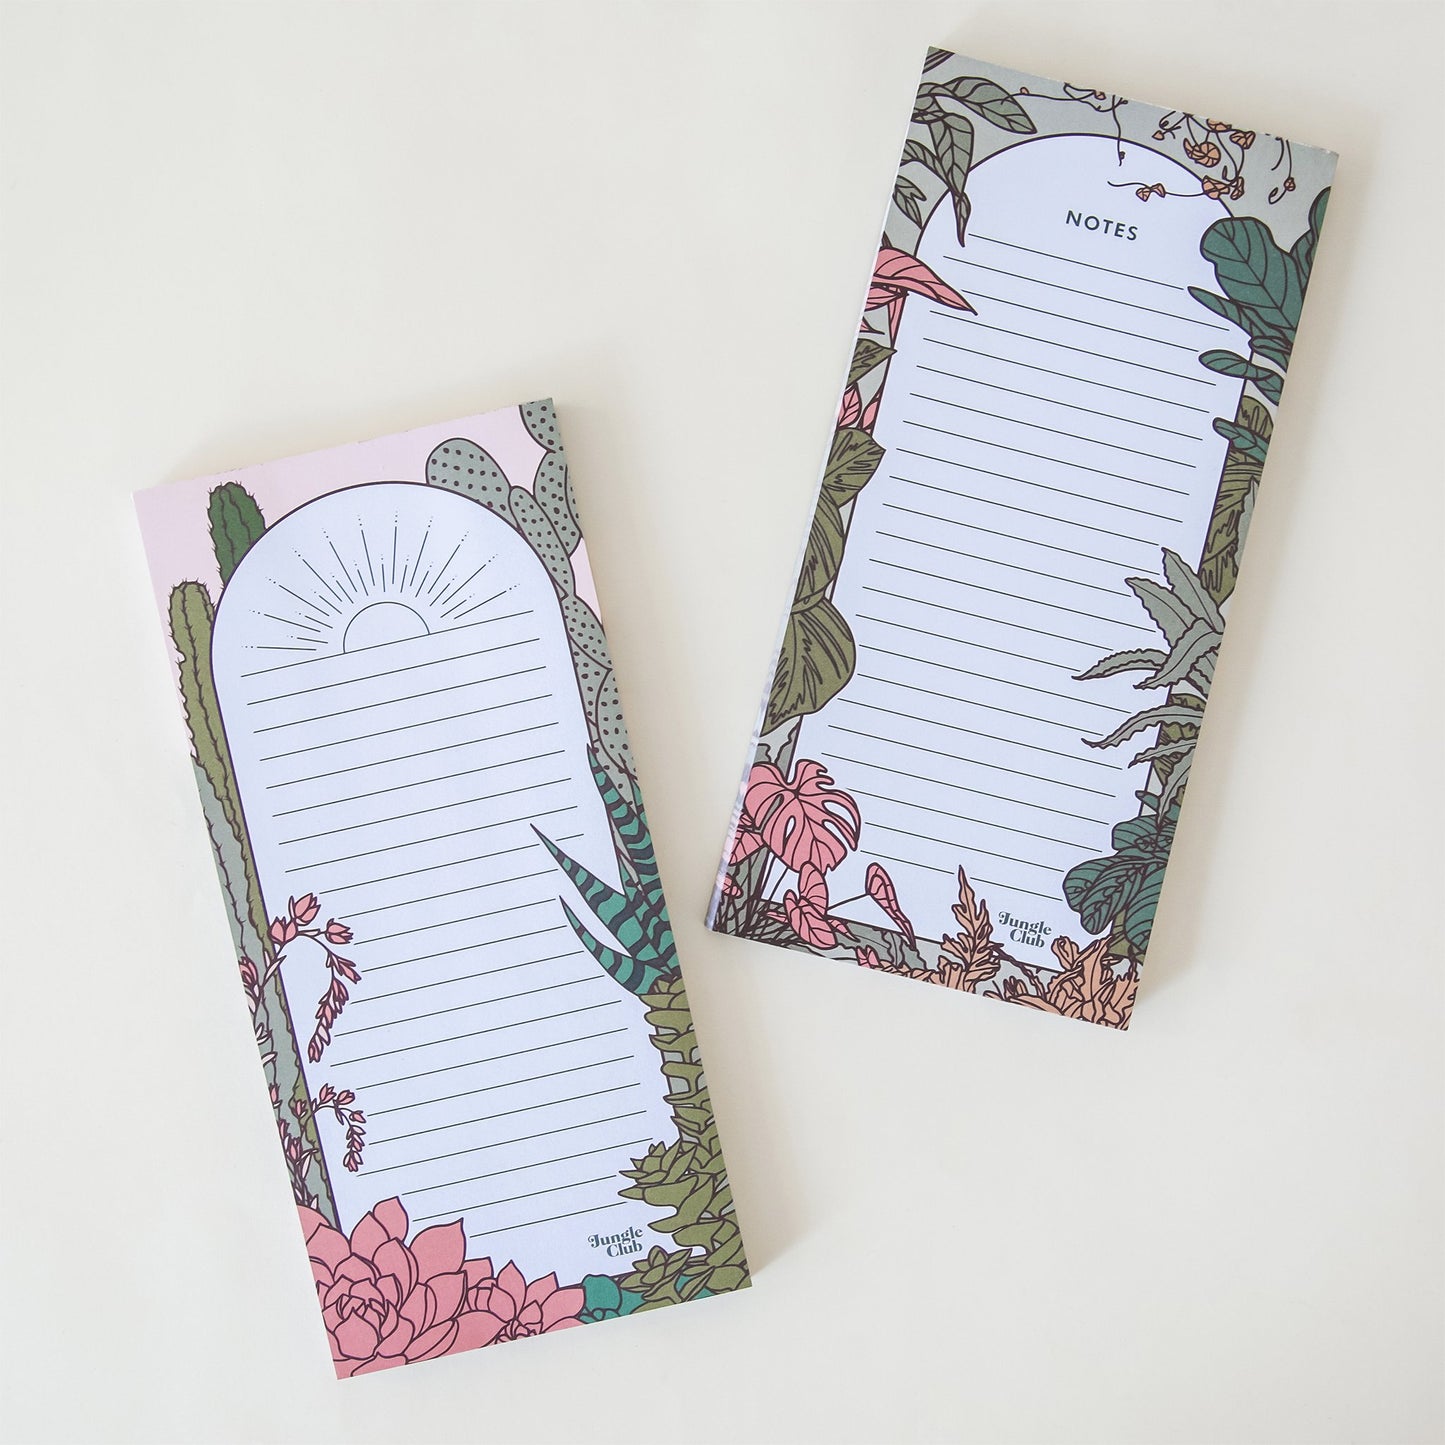 This weekly planner pad has a section for each day of the week with a deep green border, accented by an array of natural, soft toned jungle plants. Besides lays a rectangular notepad with the same design labeled 'Notes' and a baby pink ball point pen.